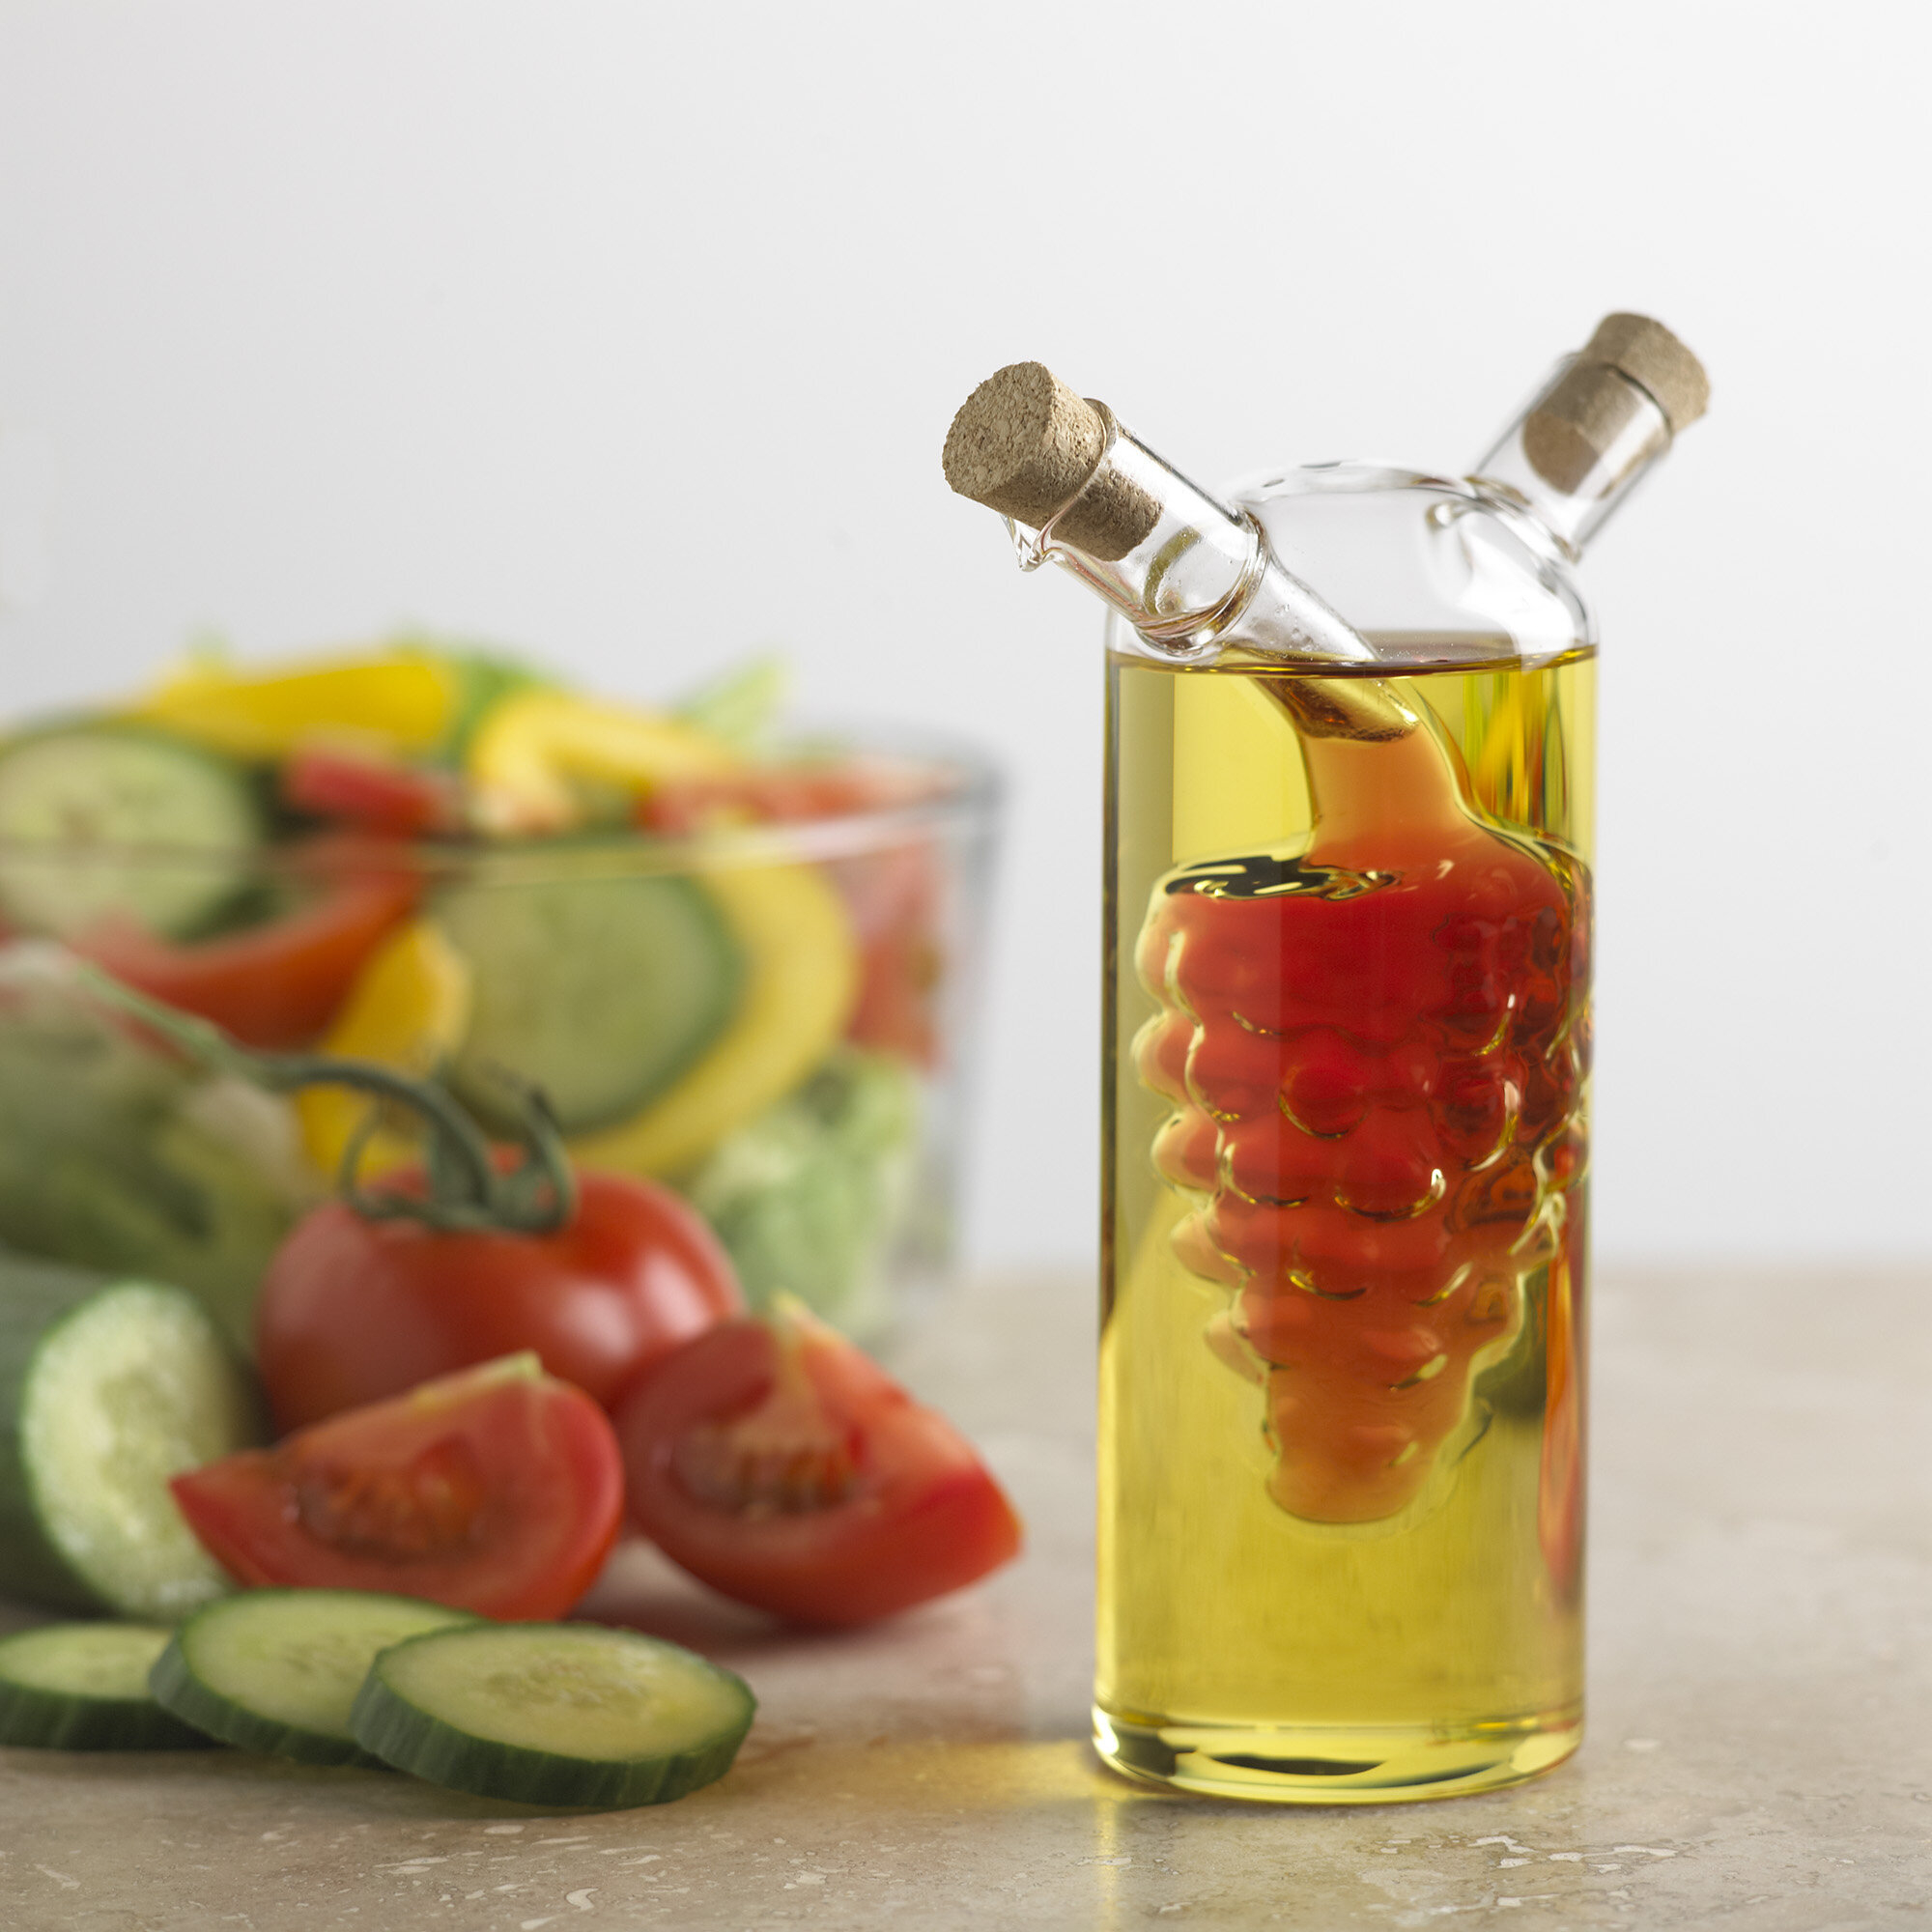 50 Decorative Oil And Vinegar Bottles You Ll Love In 2020